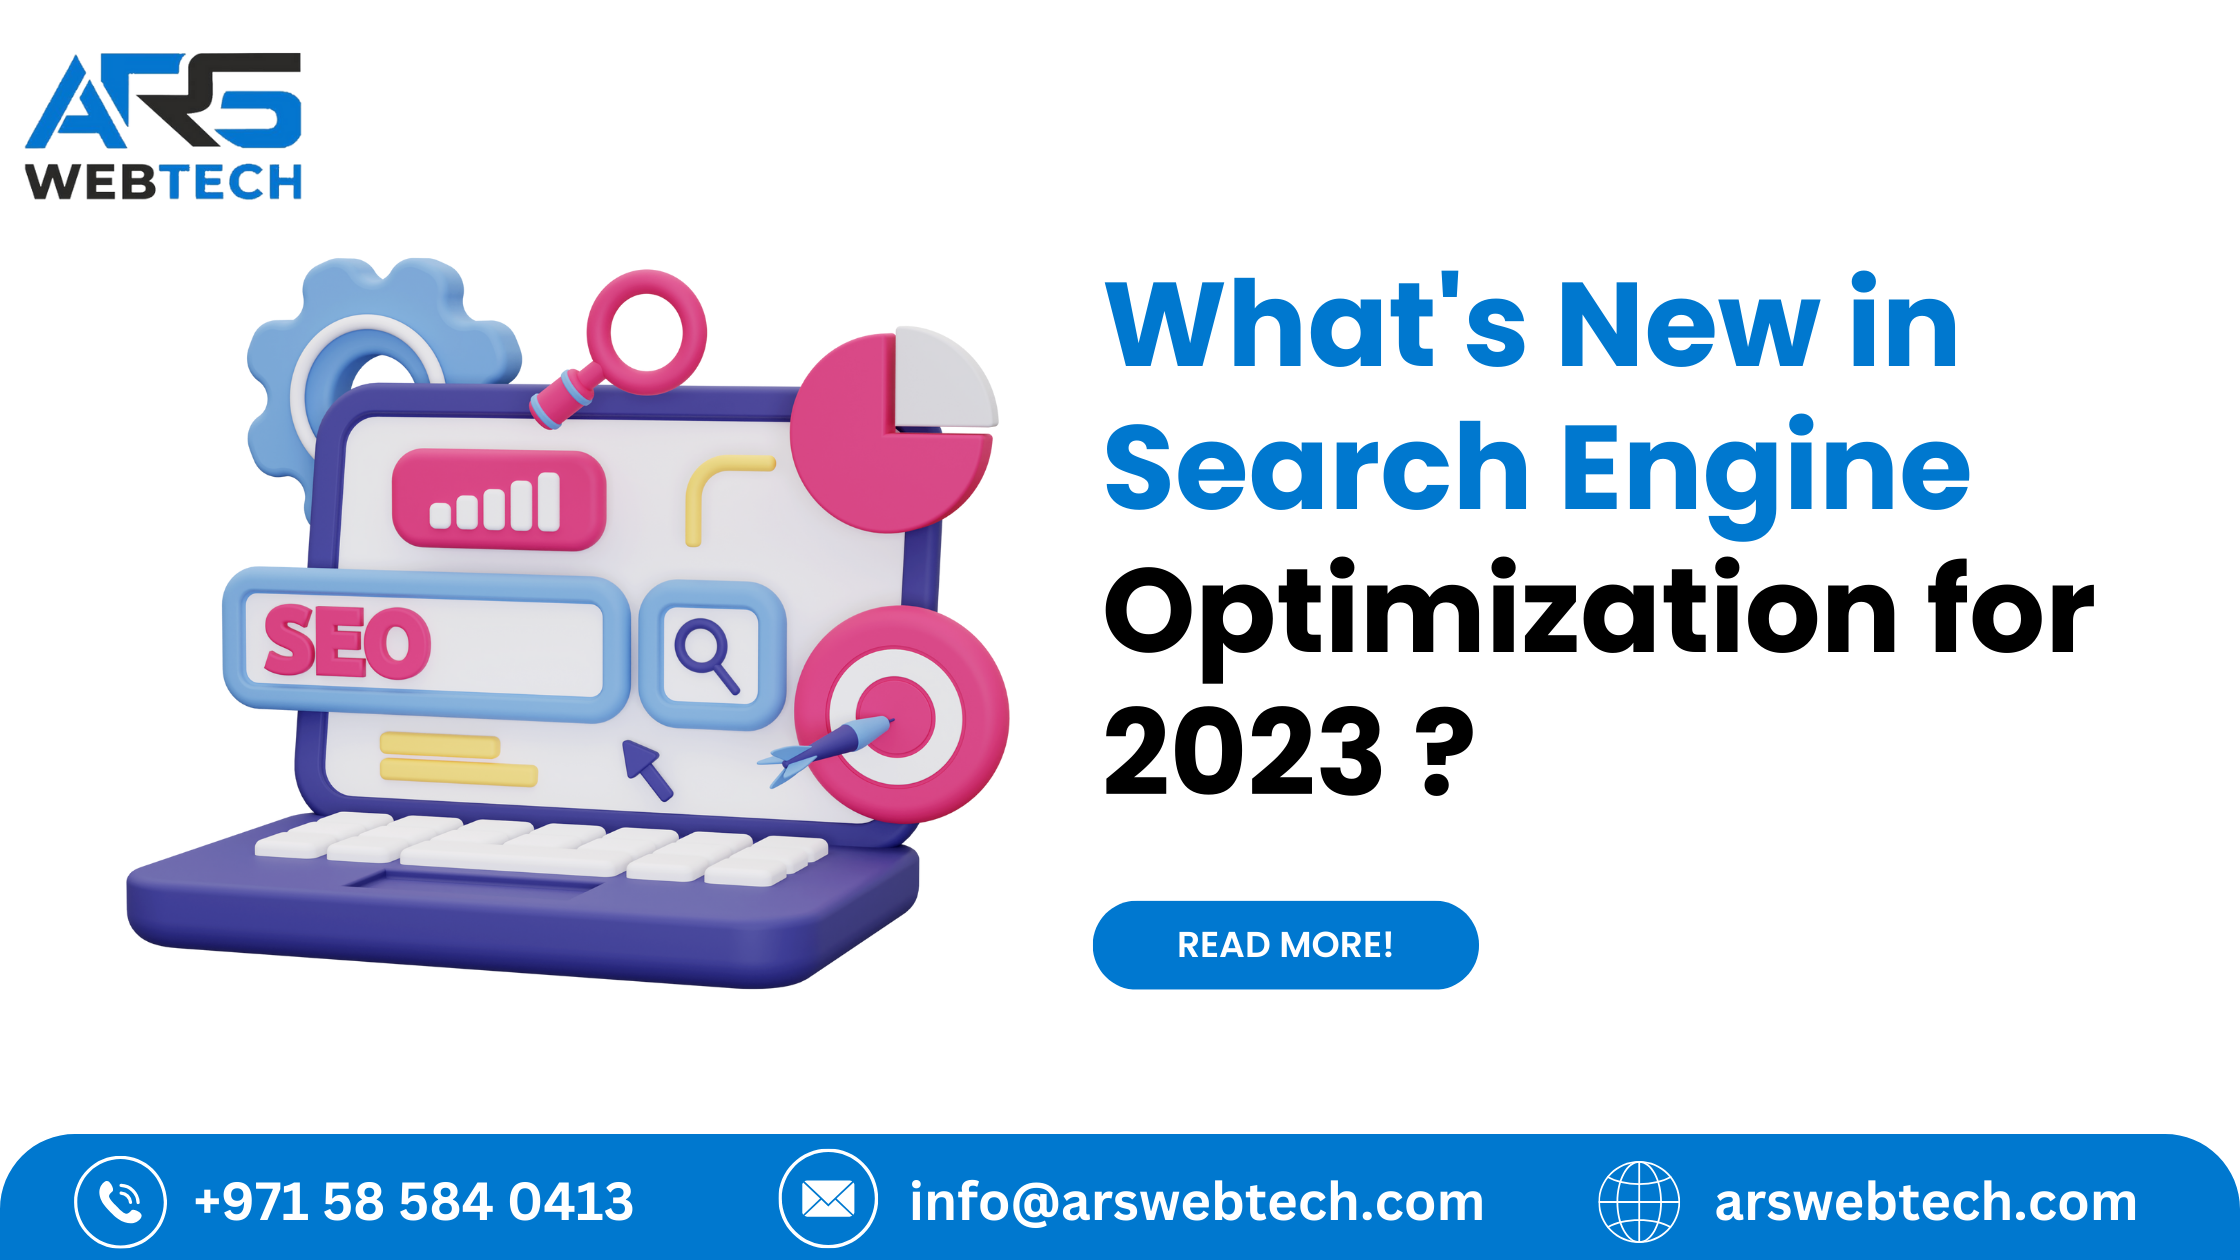  What's New in Search Engine Optimization for 2023